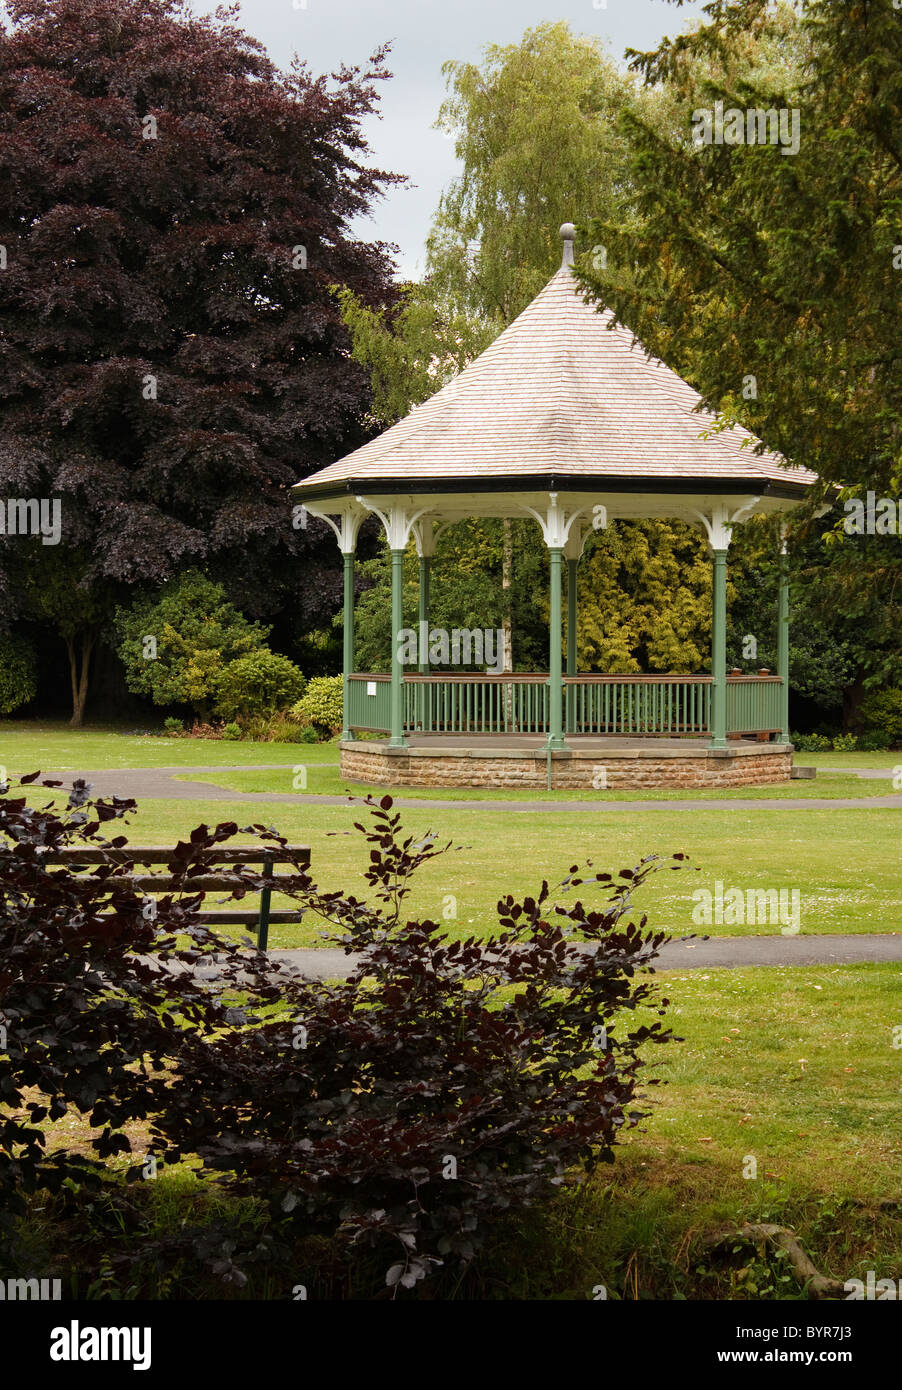 Bandstand In Town Park Melton Mowbray Stock Photo Alamy